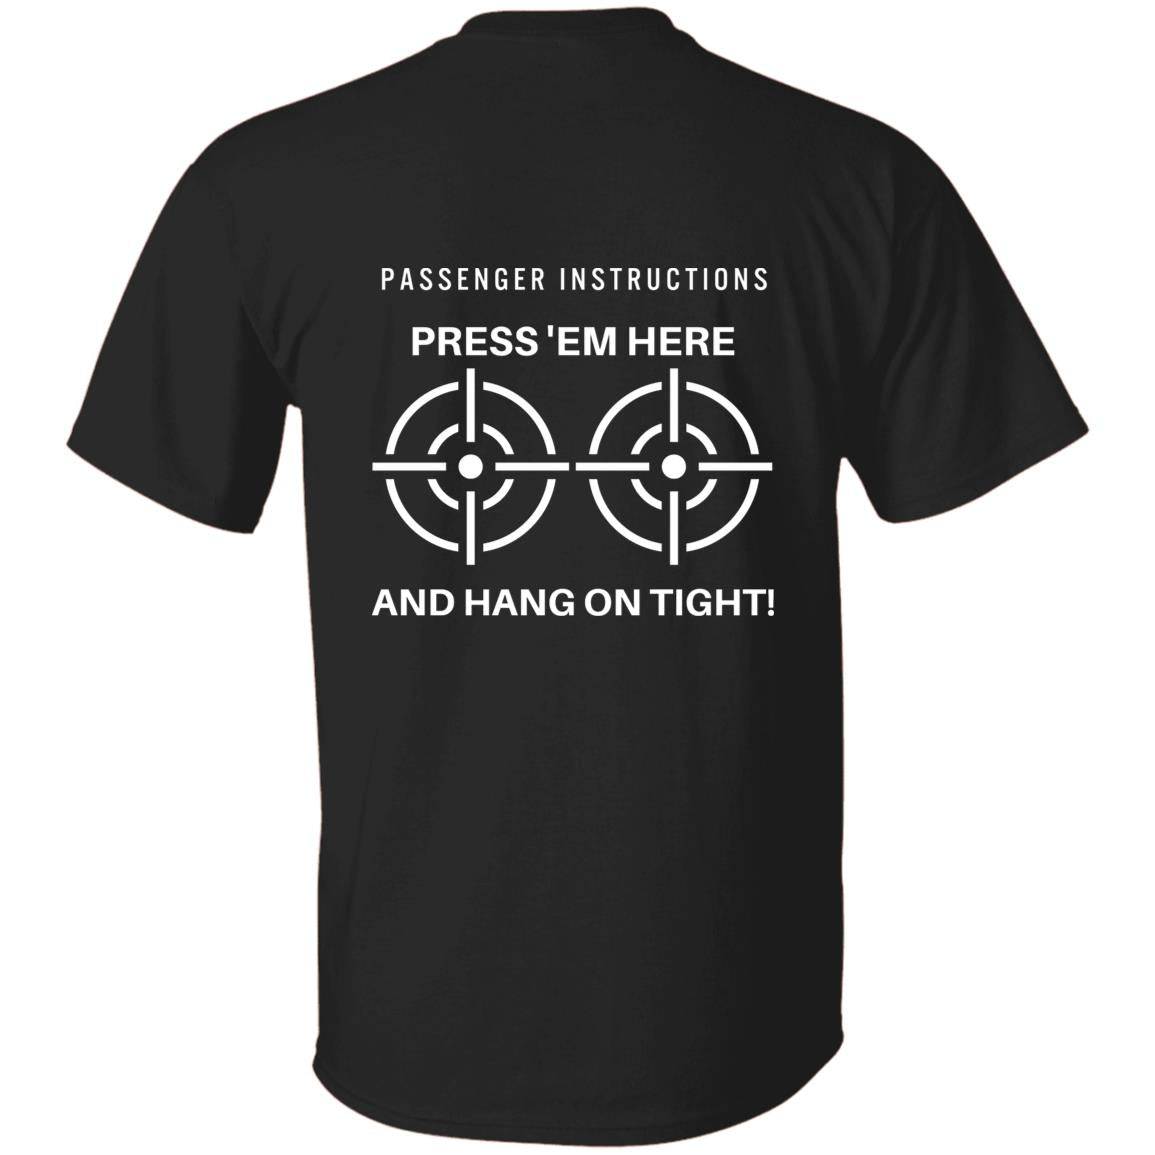 Back of the black Passenger Instruction heavyweight classic unisex t-shirt in 100% cotton. The front is blank; the back has two bulls eyes printed and reads "Press 'em here and hang on tight!"